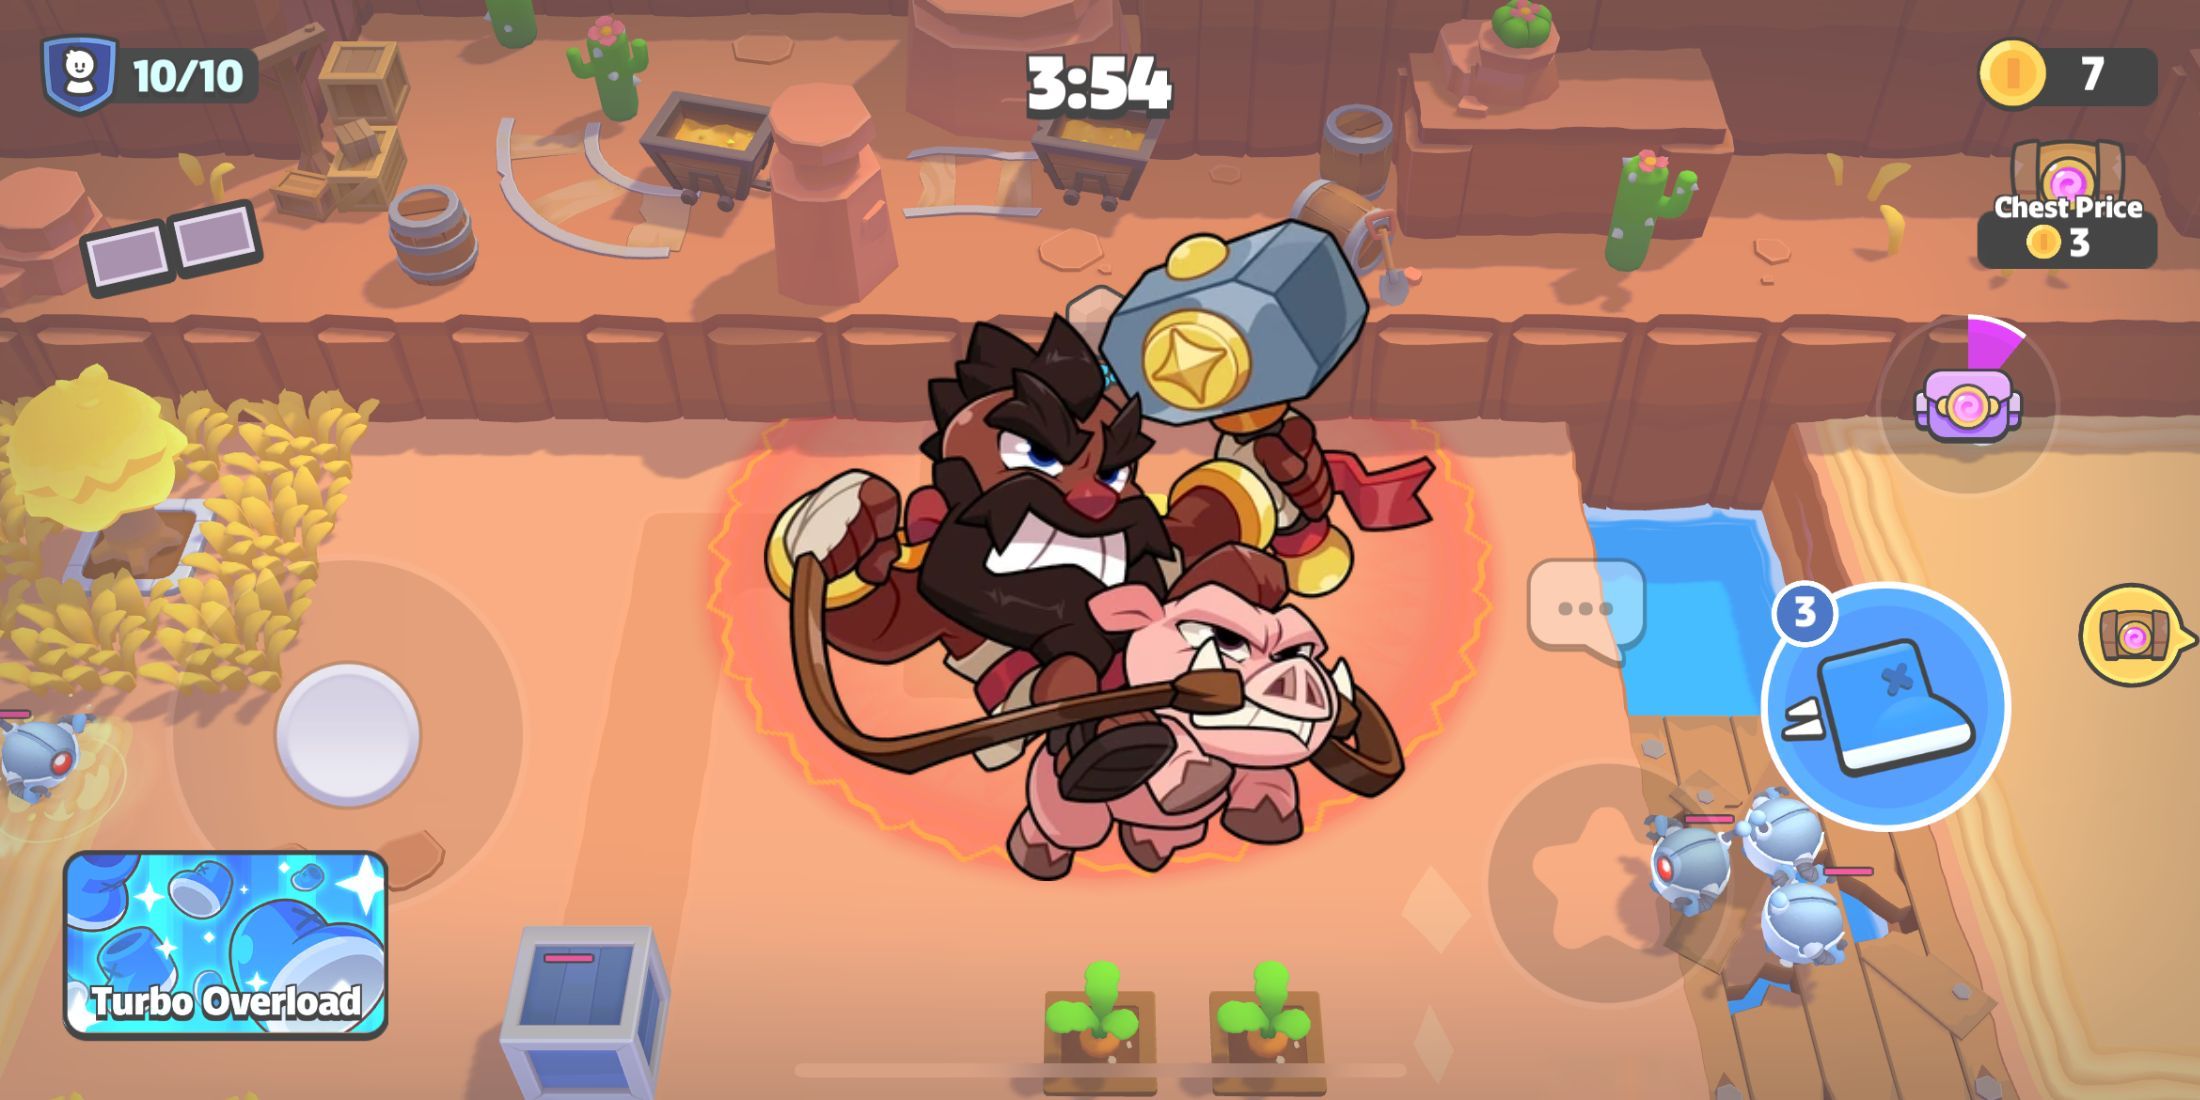 The Hog Rider character in Squad Busters with a match in the background